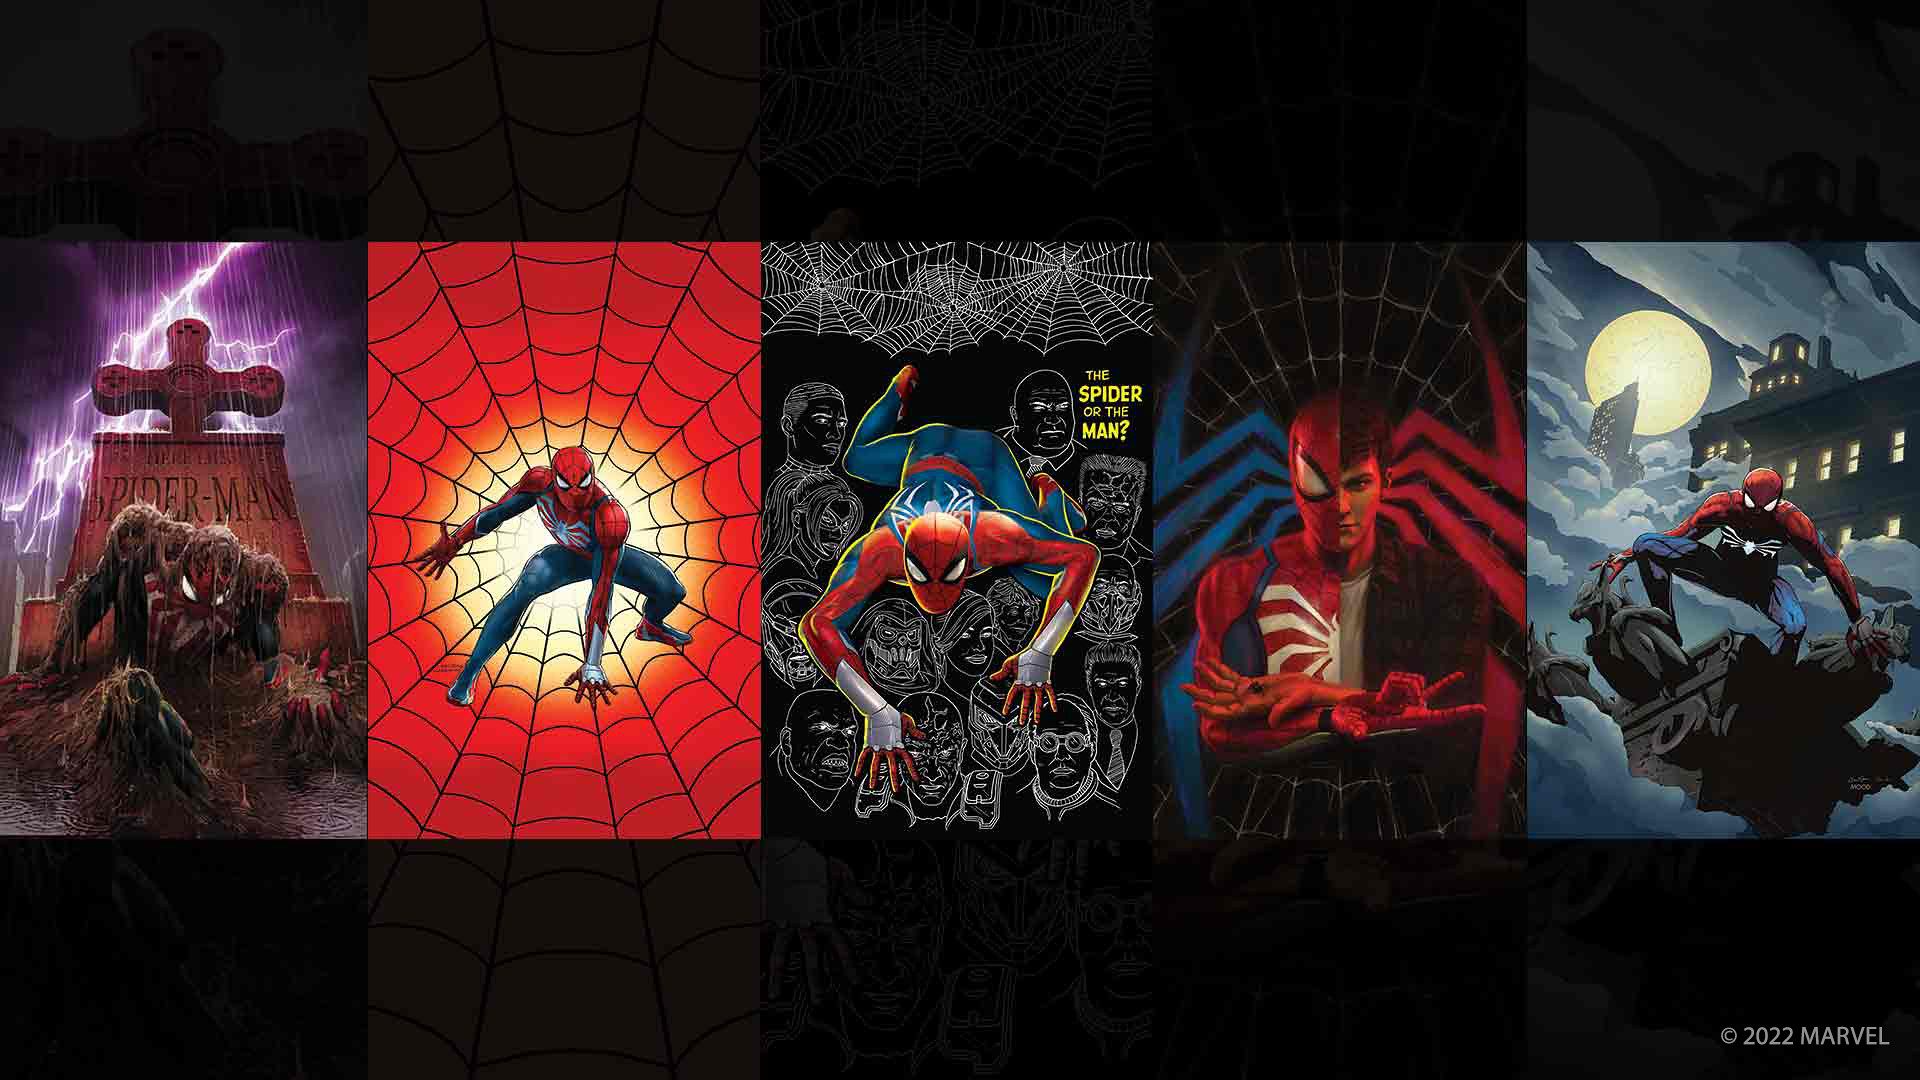 Inside the inspiration that shaped Marvel's Spider-Man: Miles